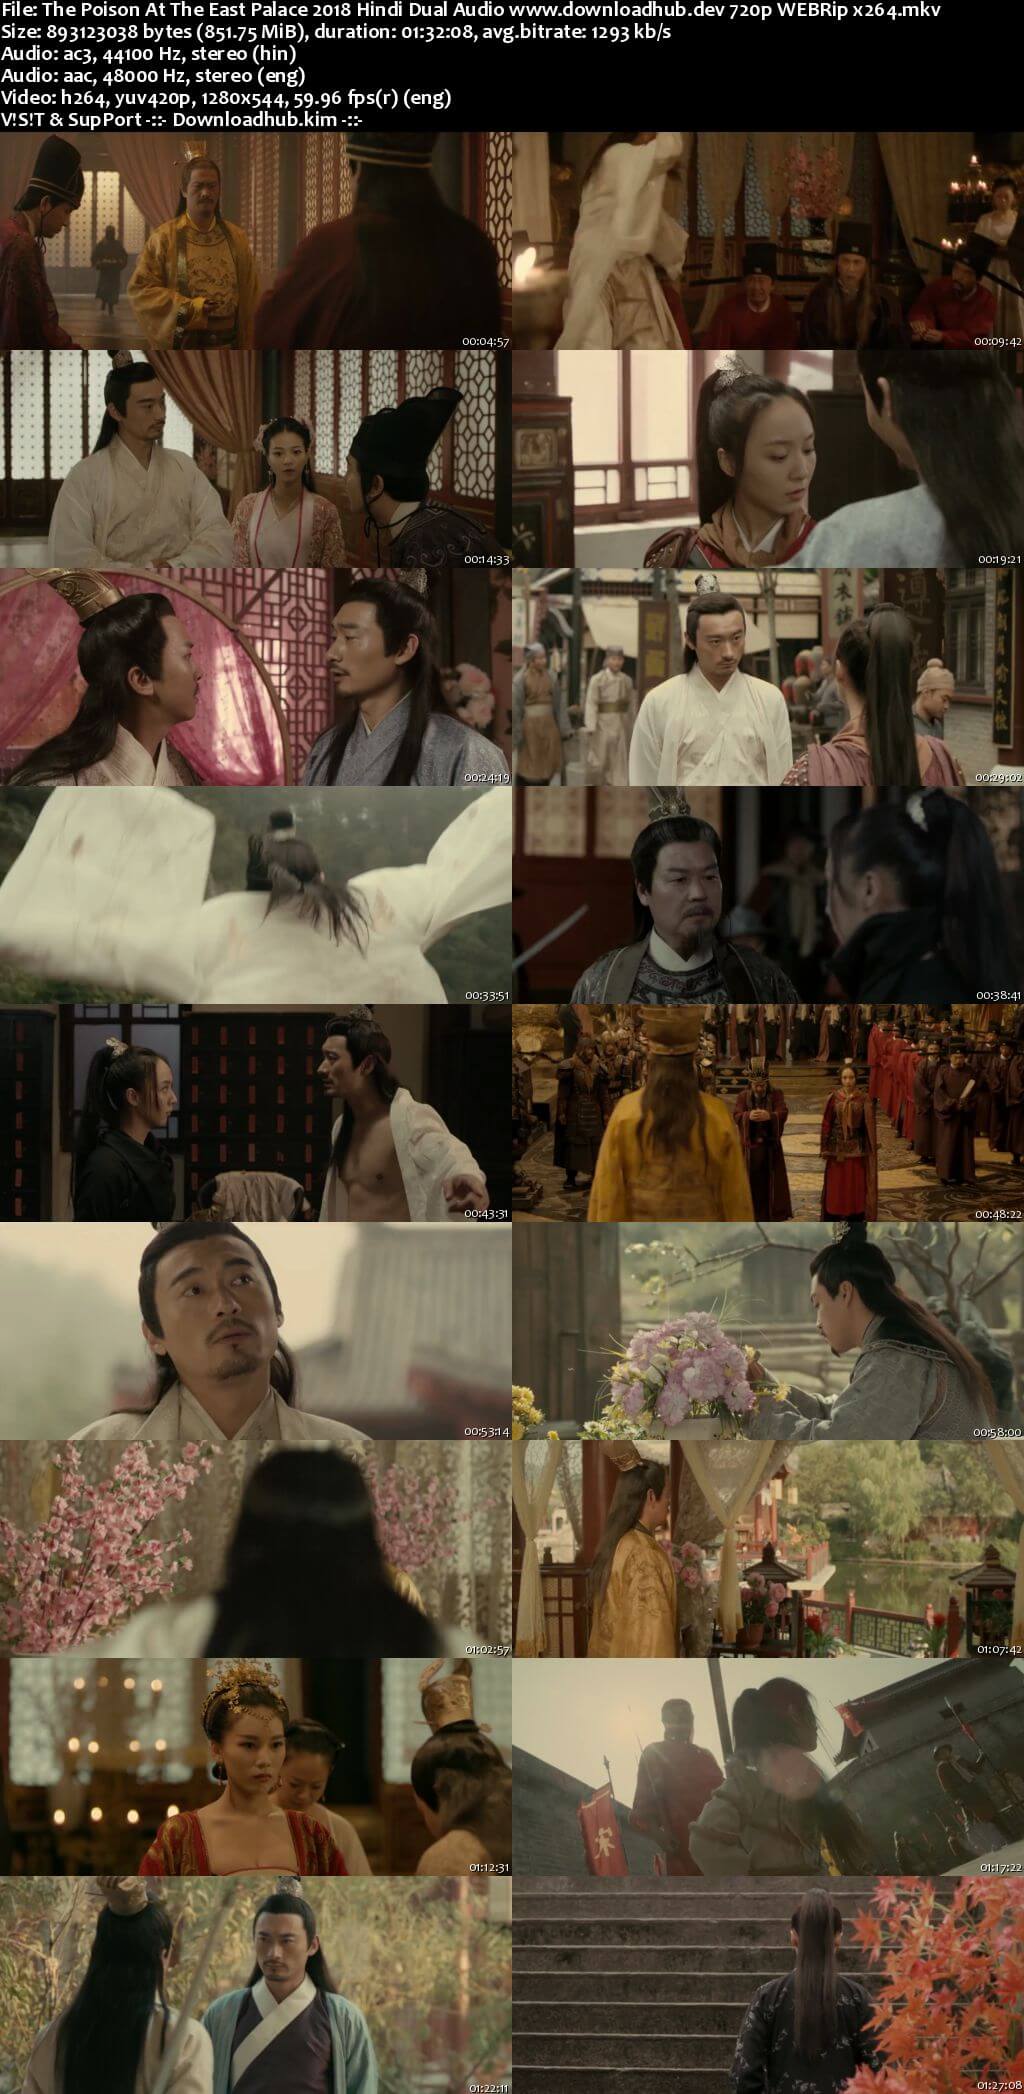 The Poison At The East Palace 2018 Hindi Dual Audio 720p WEBRip x264